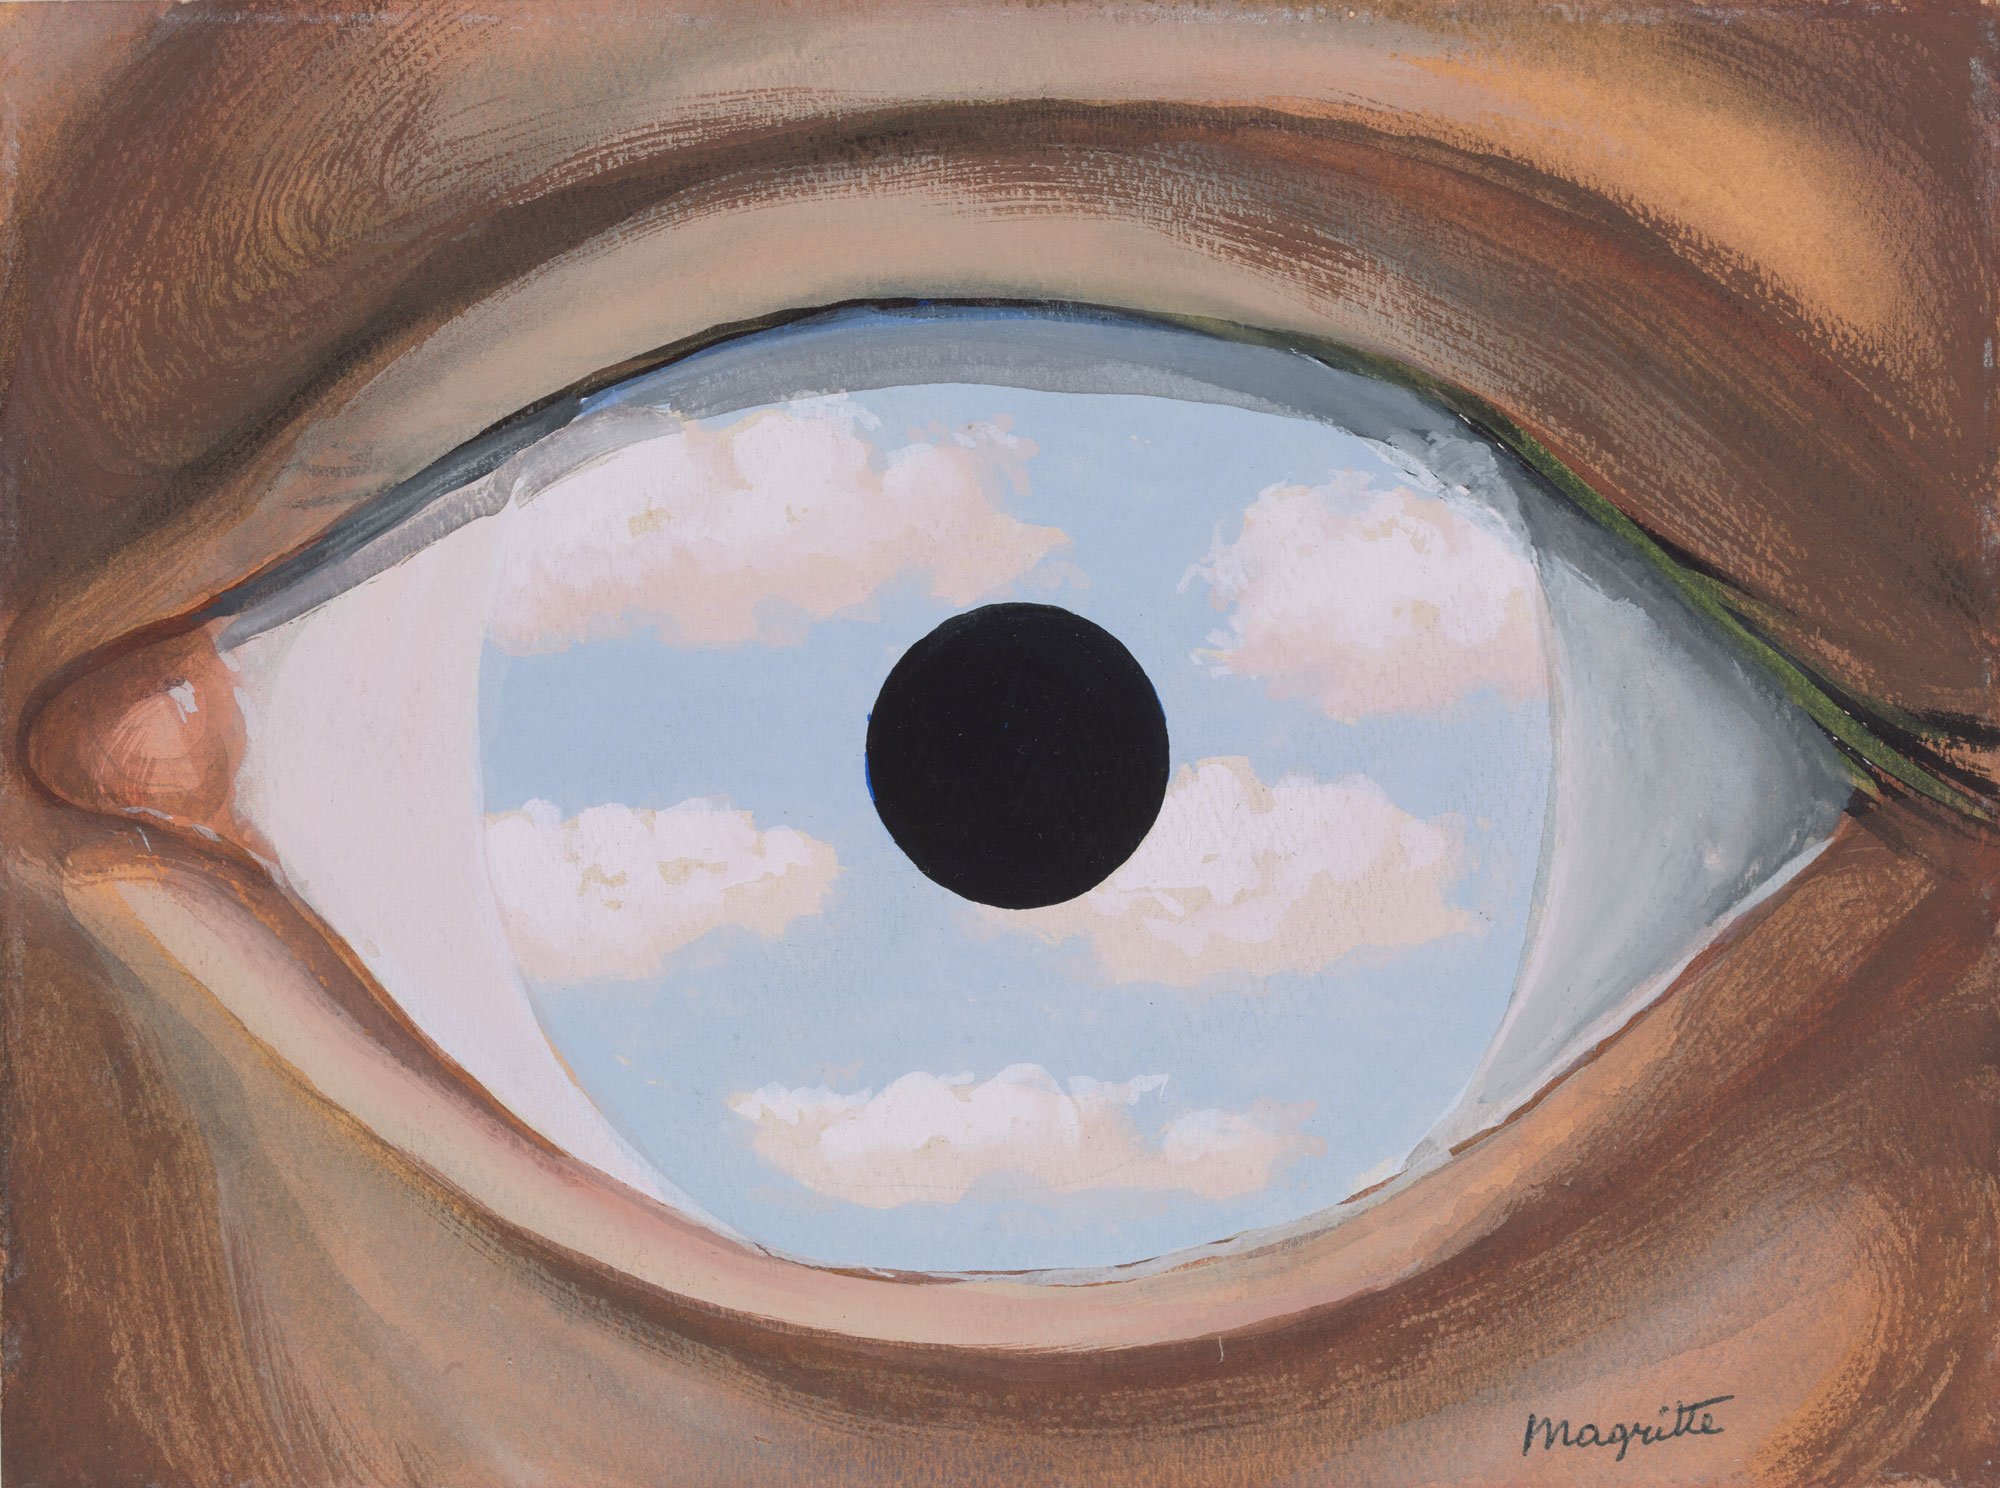  René Magritte (Belgium, 1889-1967),  Le Faux Miroir , 1952, gouache on paper, 5 5/8 x 7 ½ inches. Isabelle and Scott Black Collection. Image courtesy of Luc Demers.   © 2022 C. Herscovici / Artists Rights Society (ARS), New York 